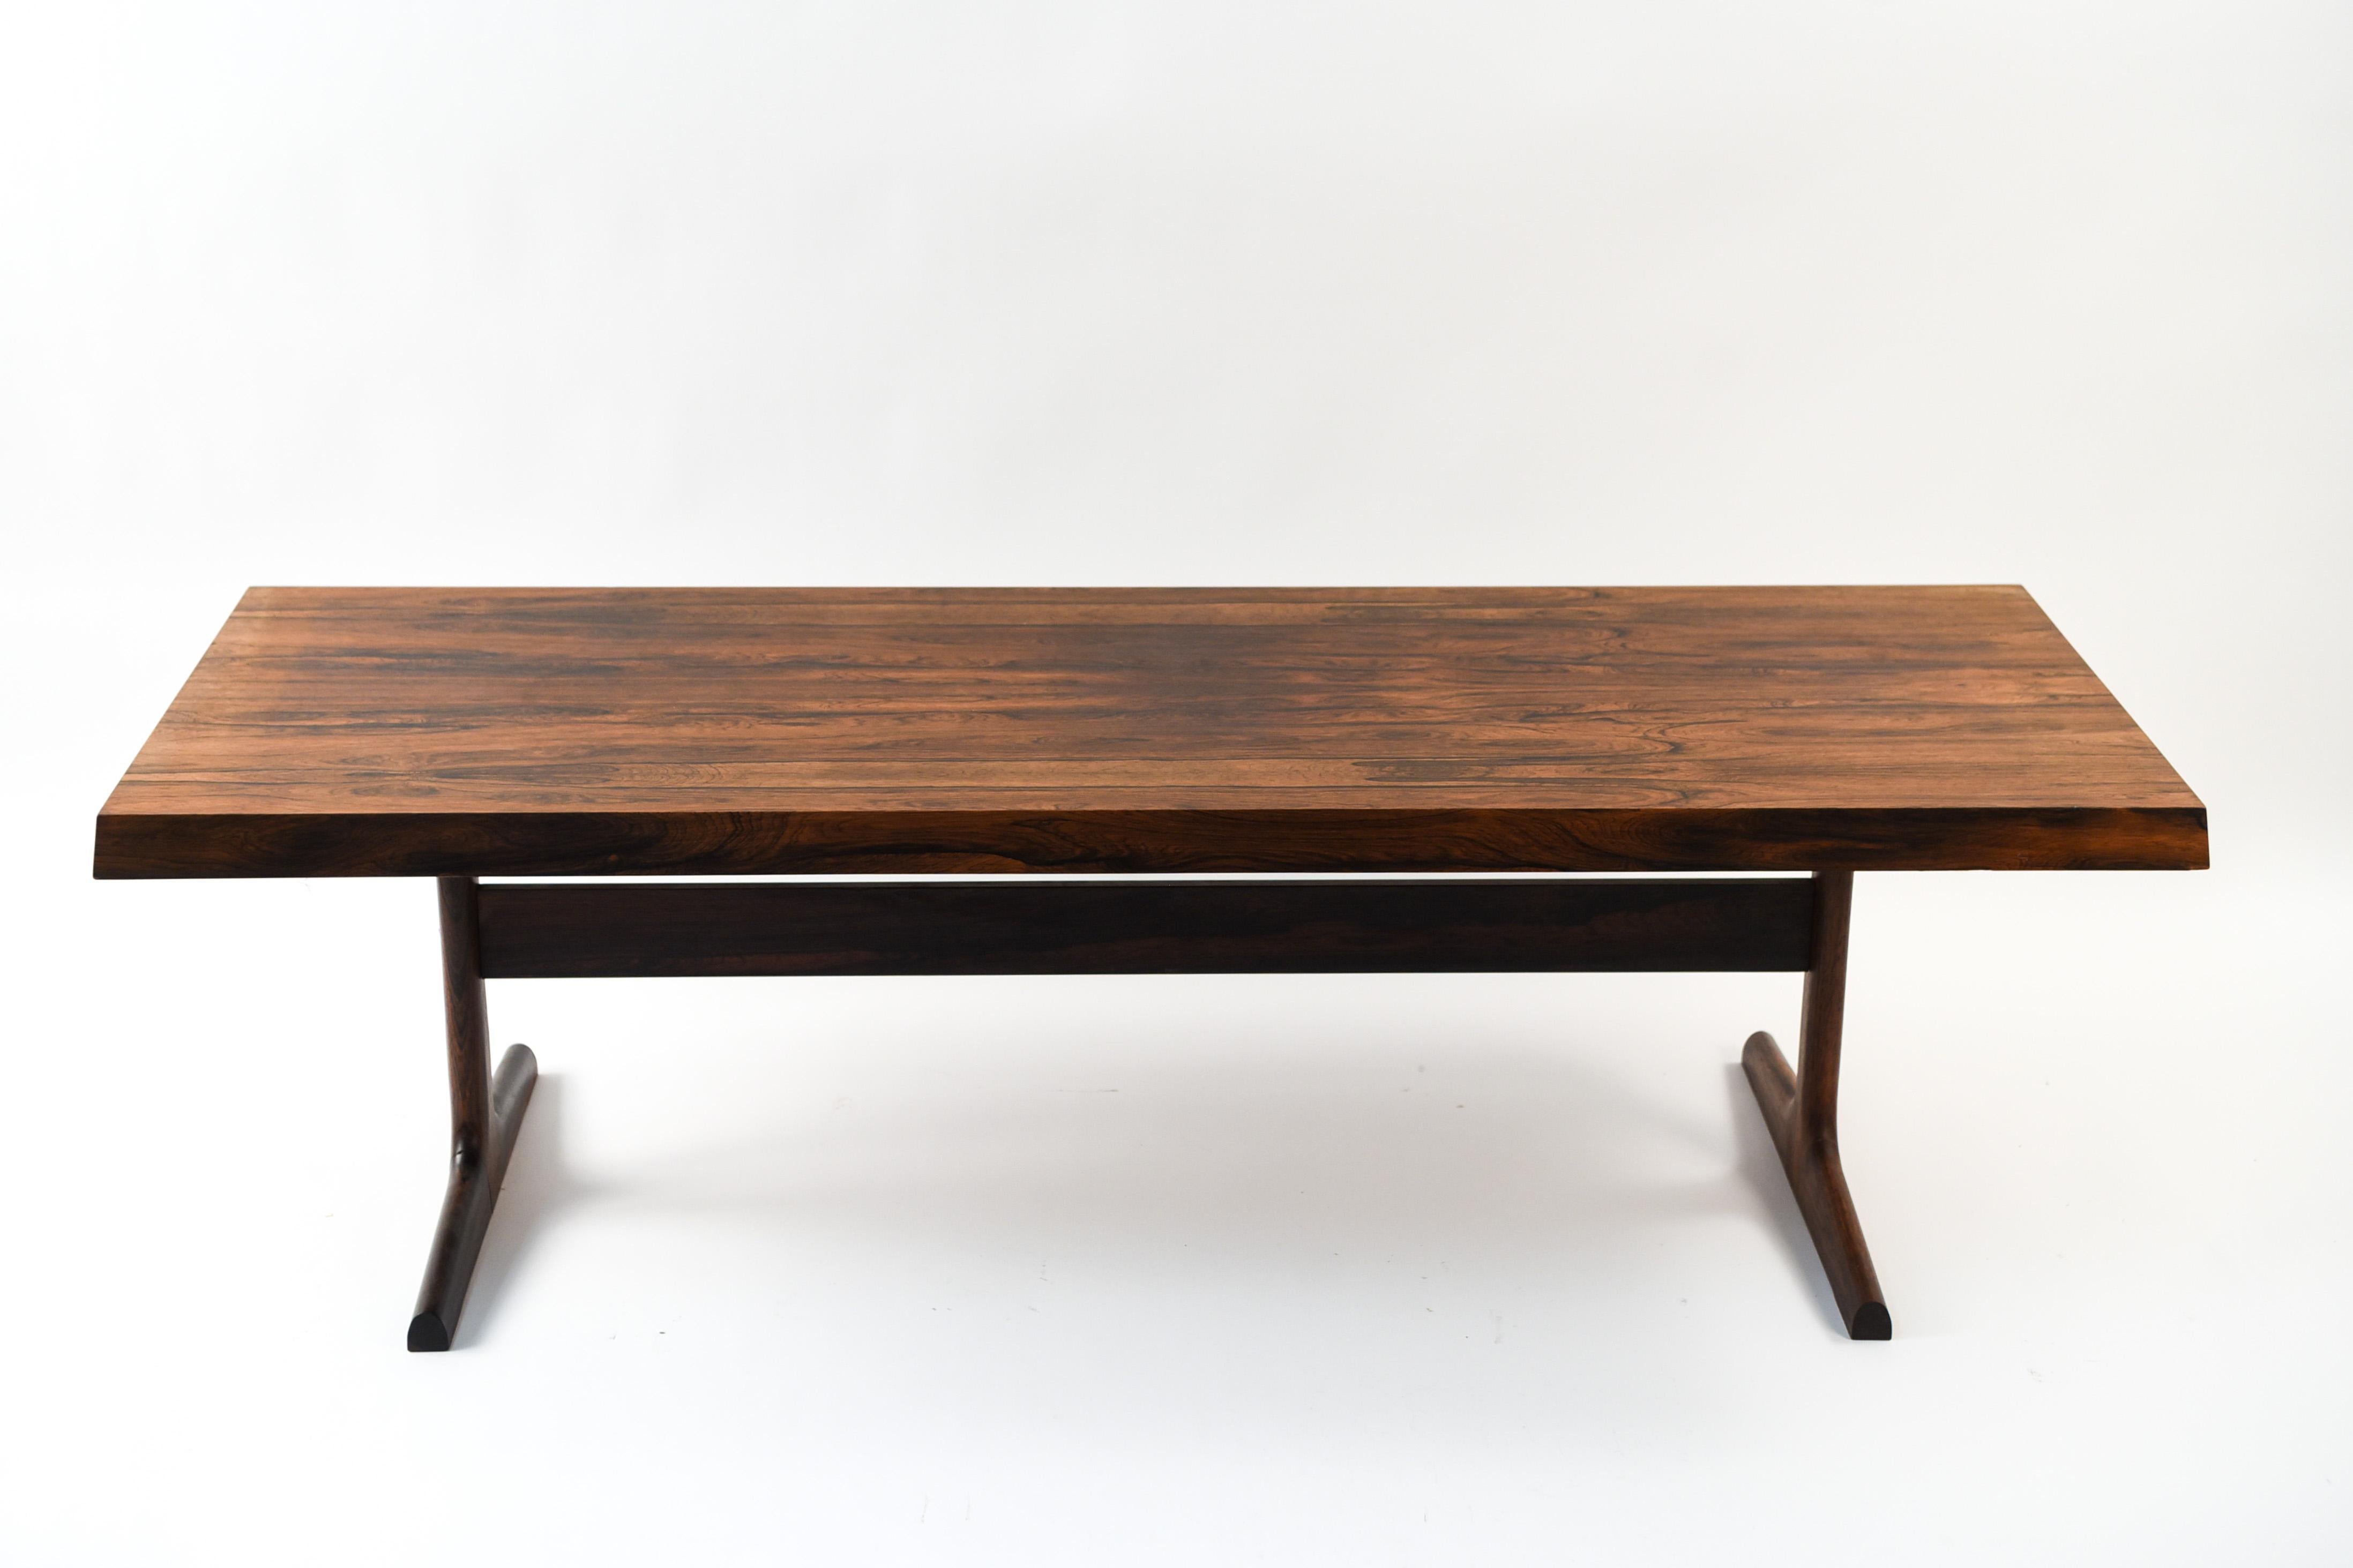 This Danish midcentury coffee table was designed by H.W. Klein, circa 1960s. Made of rosewood with a visually interesting grain pattern to the top. The simple rectangular form makes this a versatile piece that can be dressed up or down in an